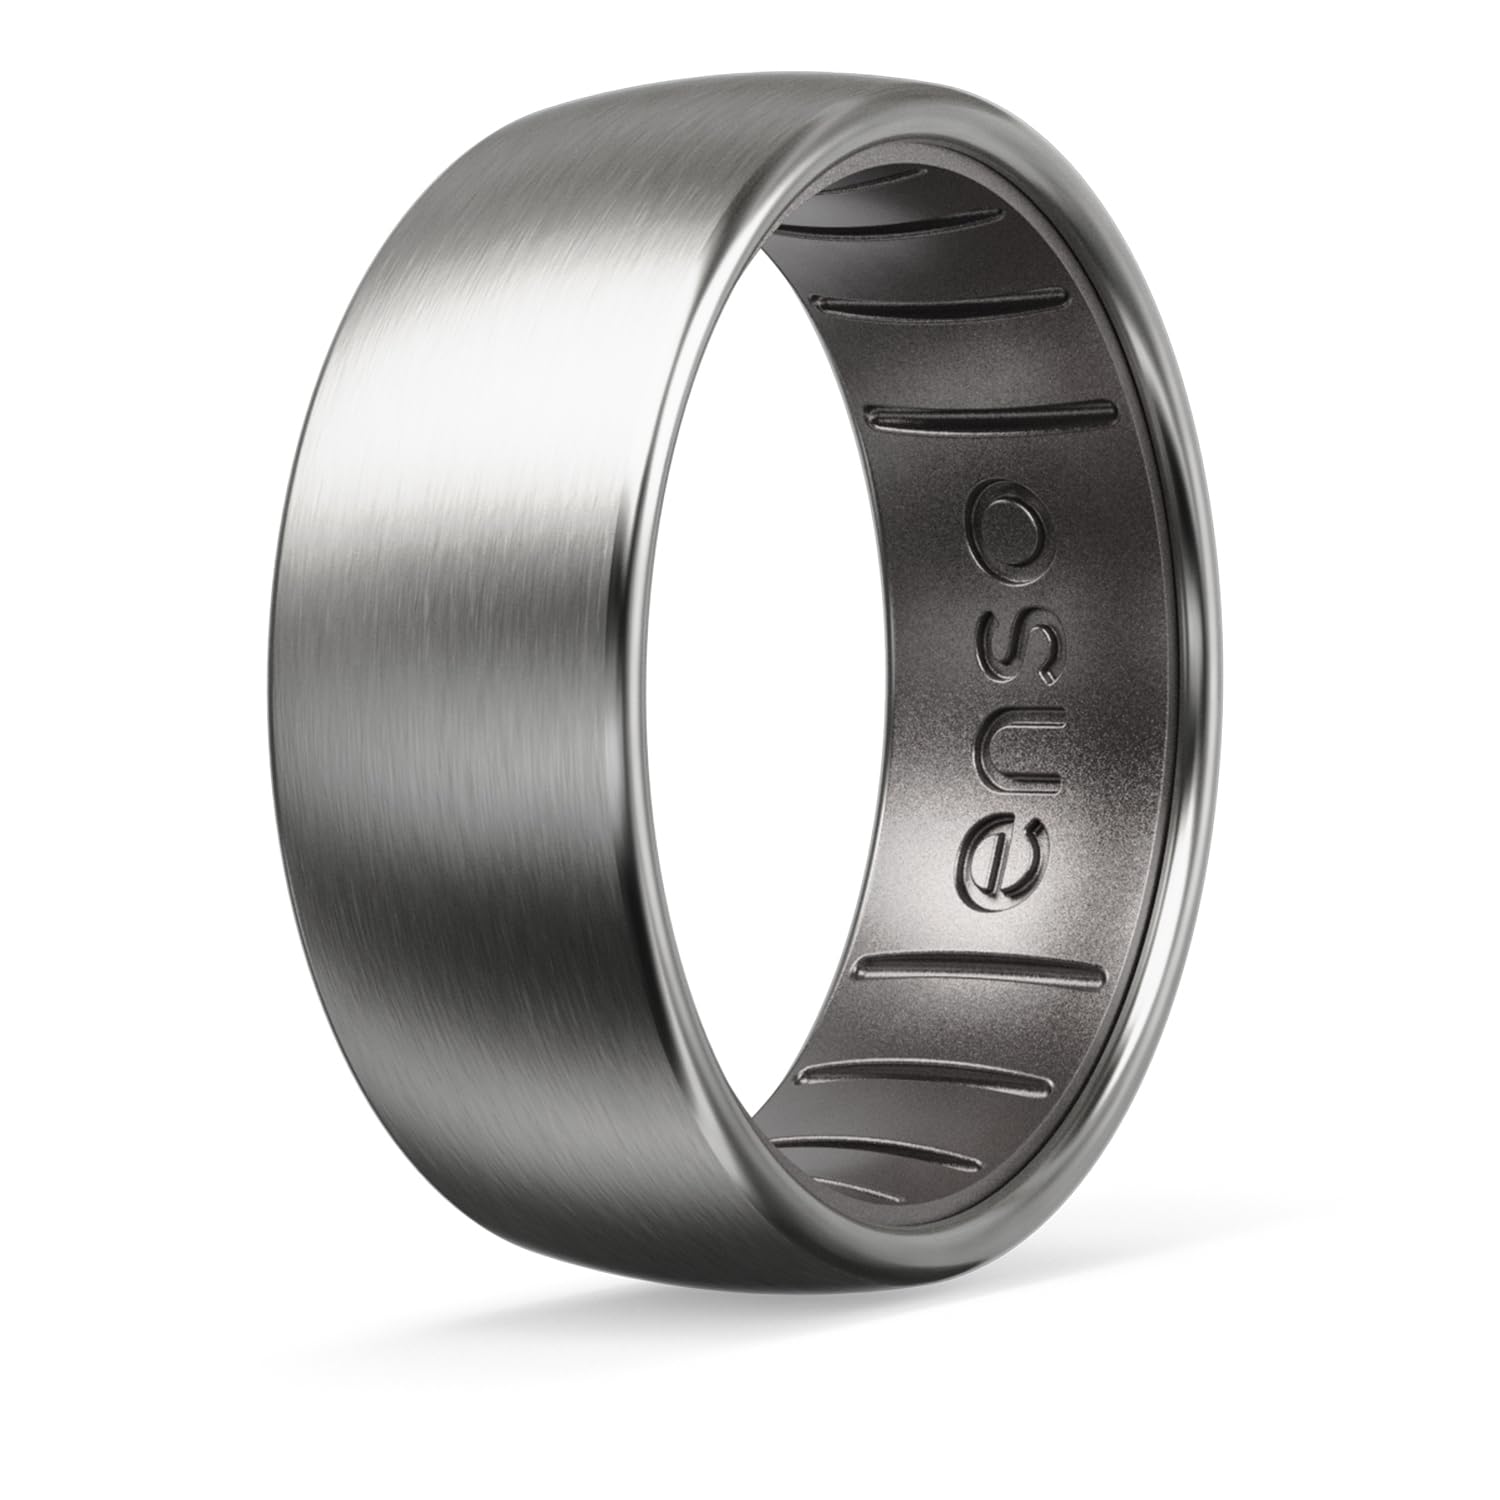 Enso Rings Hybrid Rings - Durable Brushed Outer Metal - Comfortable and Premium Inner Silicone